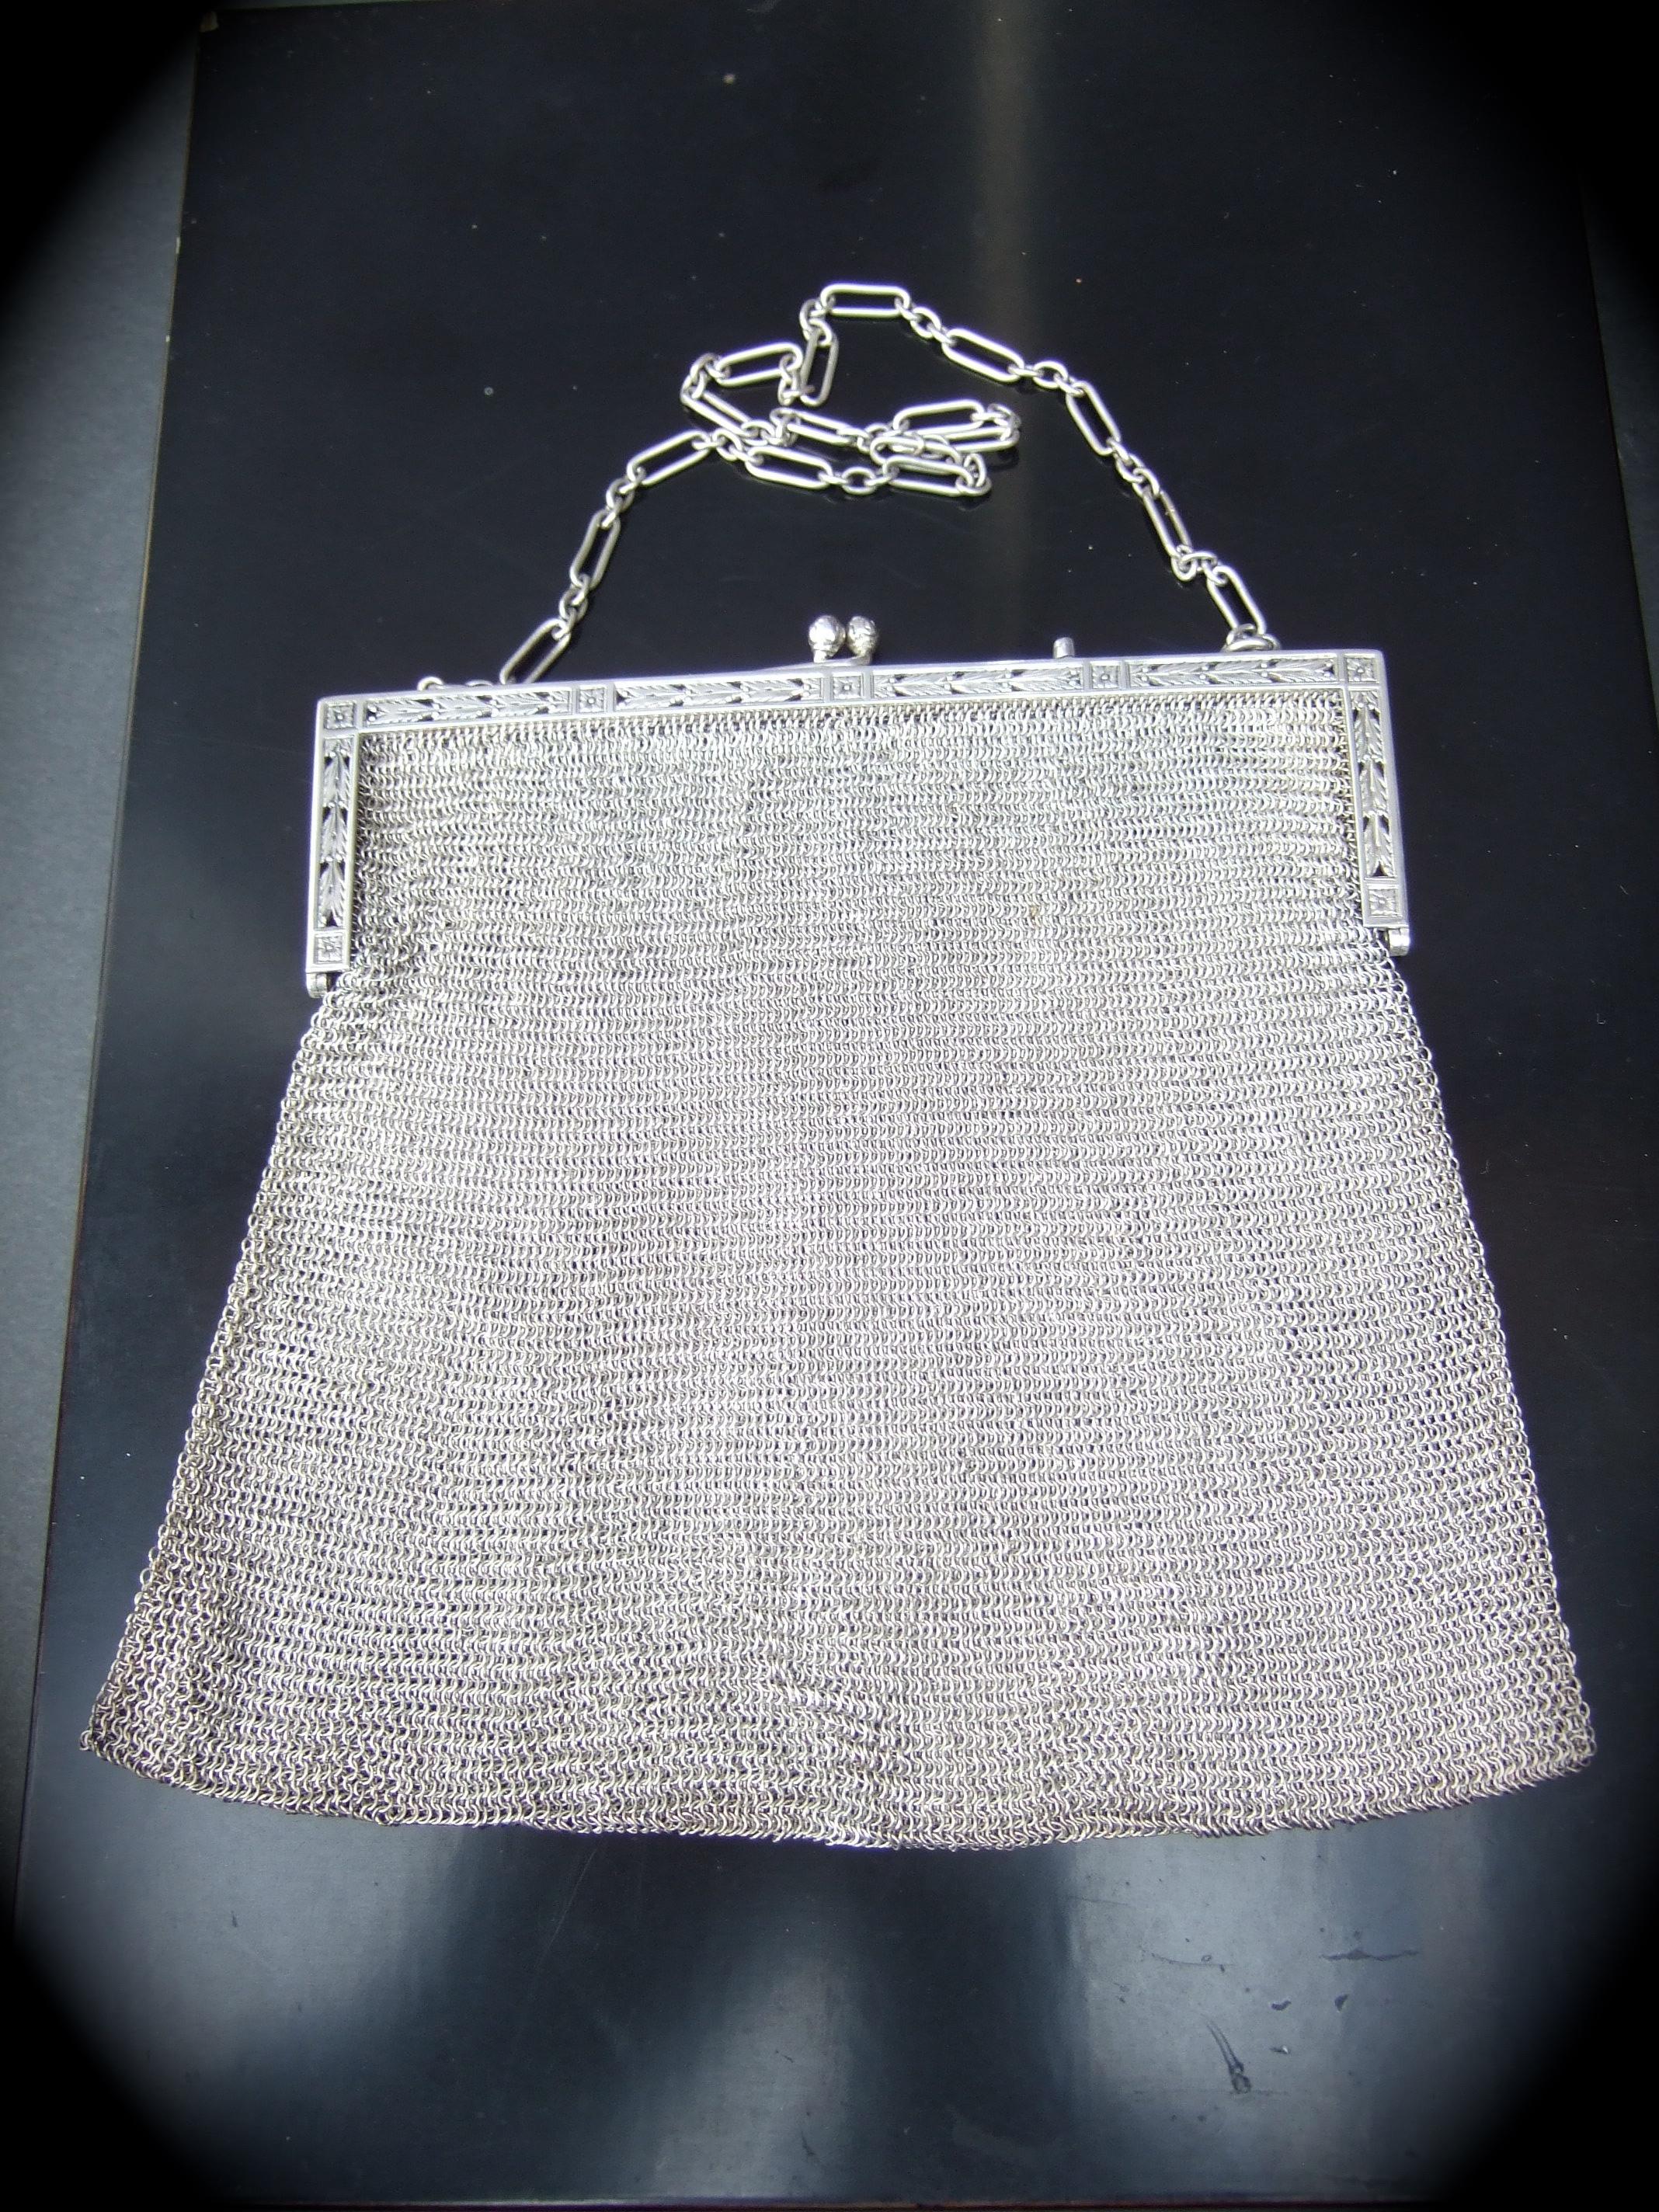 Tiffany & Co. Rare Sterling Silver Chain Mail Evening Bag c 1910 6